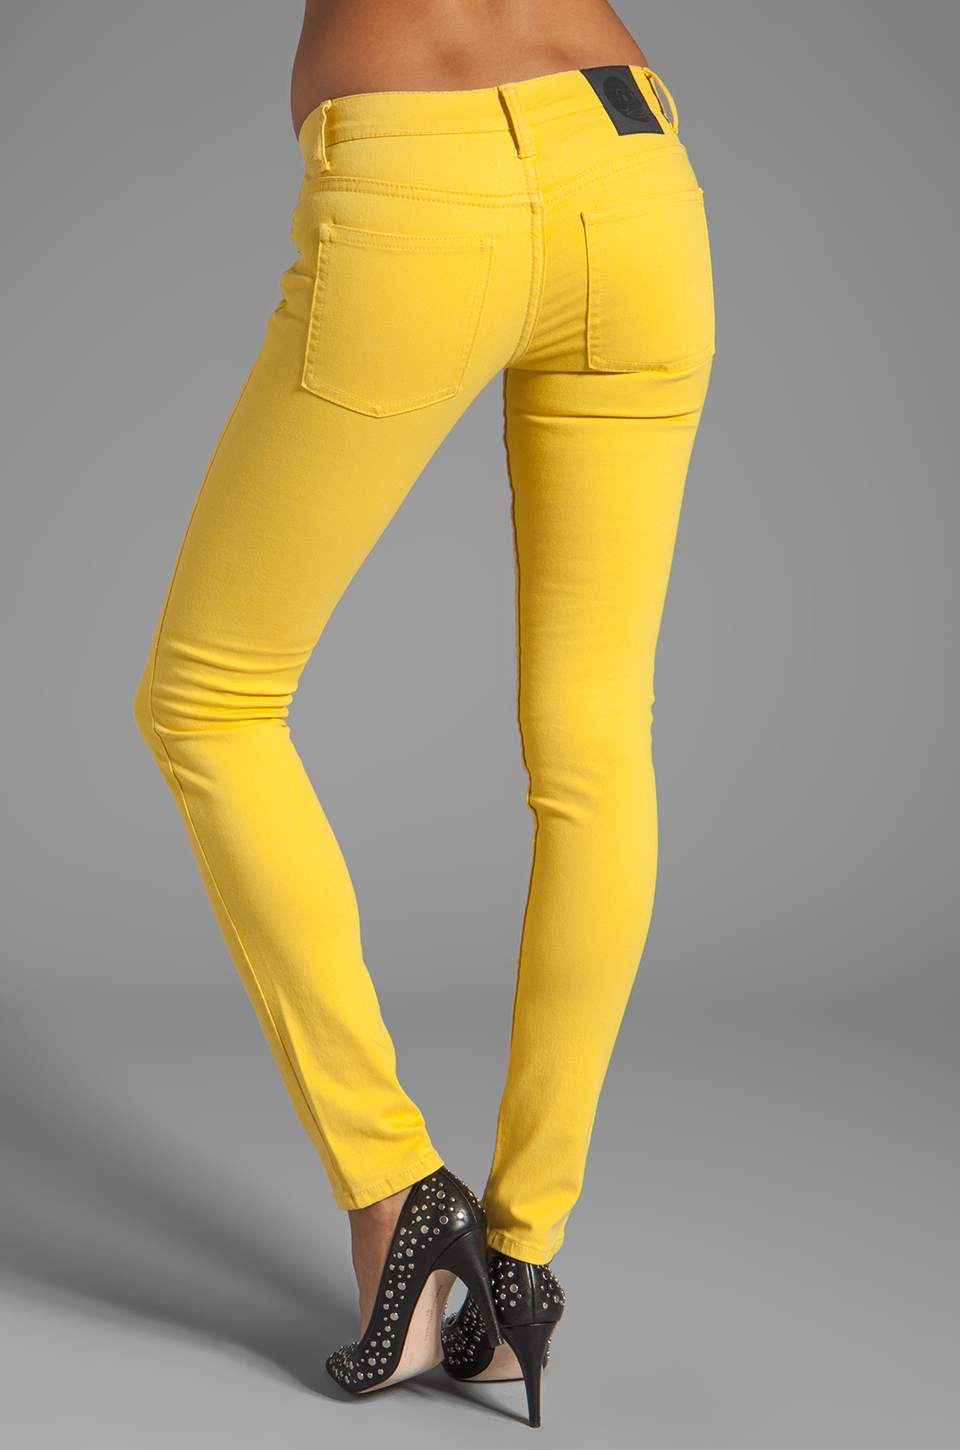 Cheap Monday Narrow Jeans in Yellow |